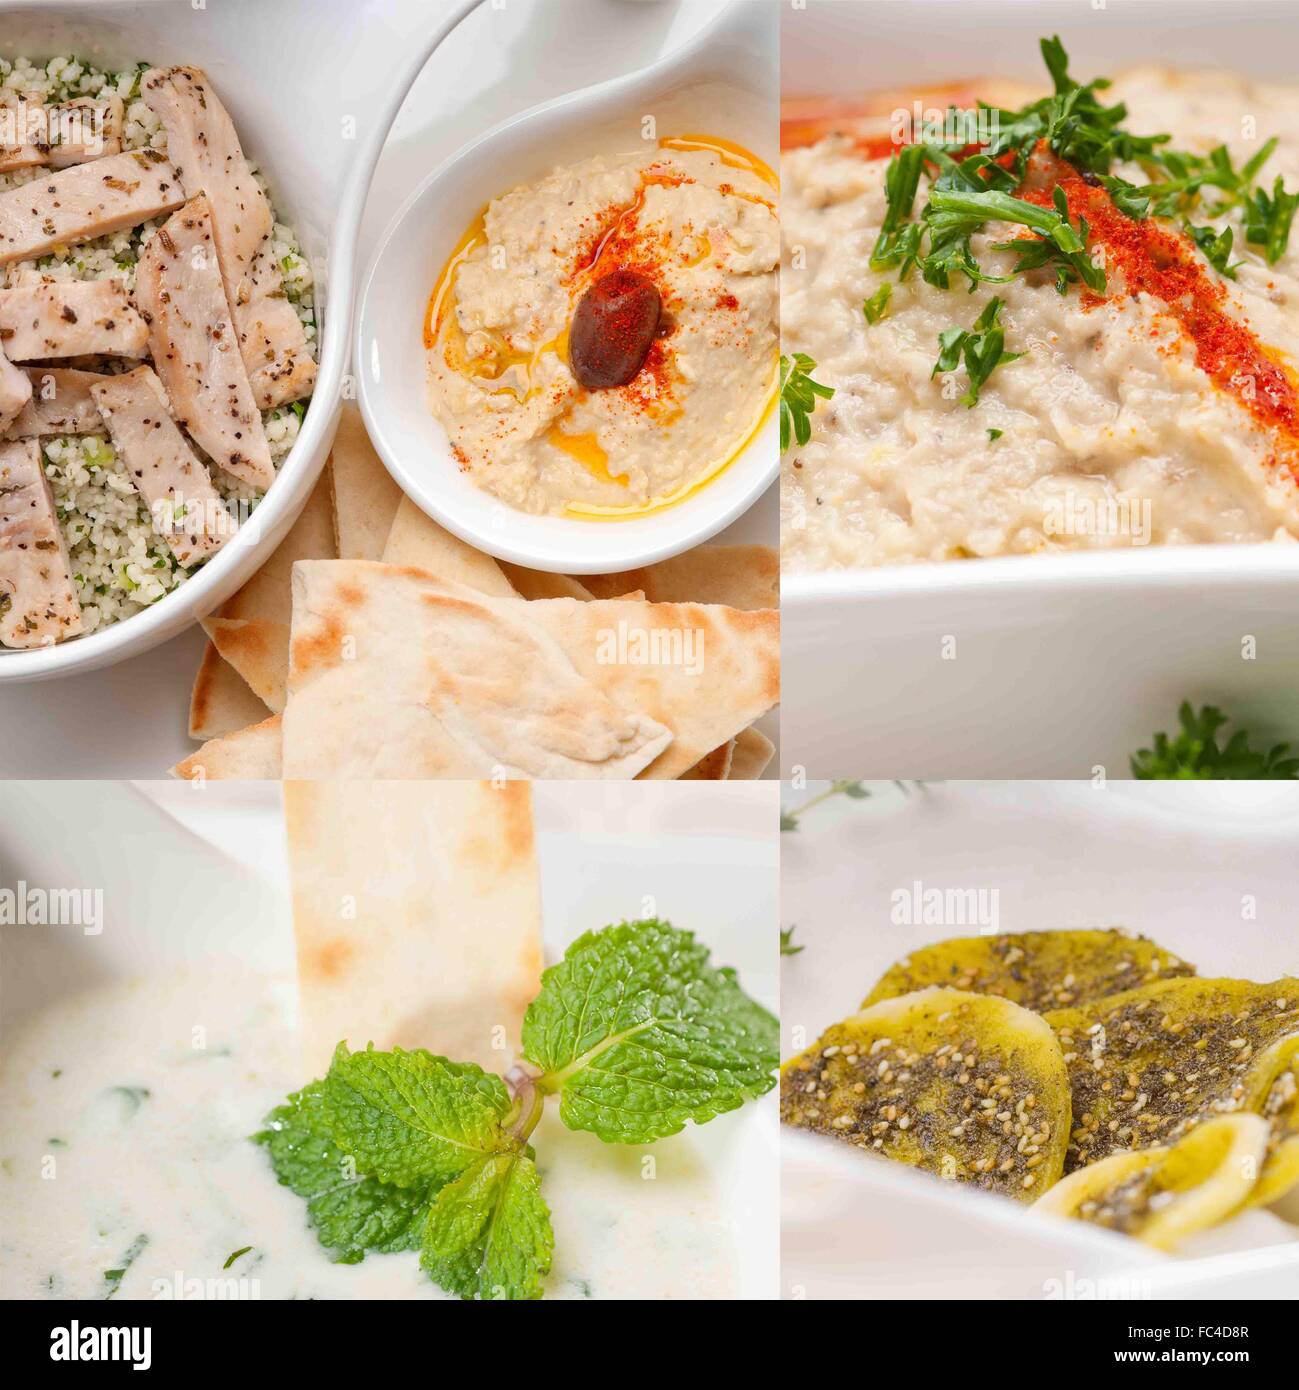 middle east food collage Stock Photo